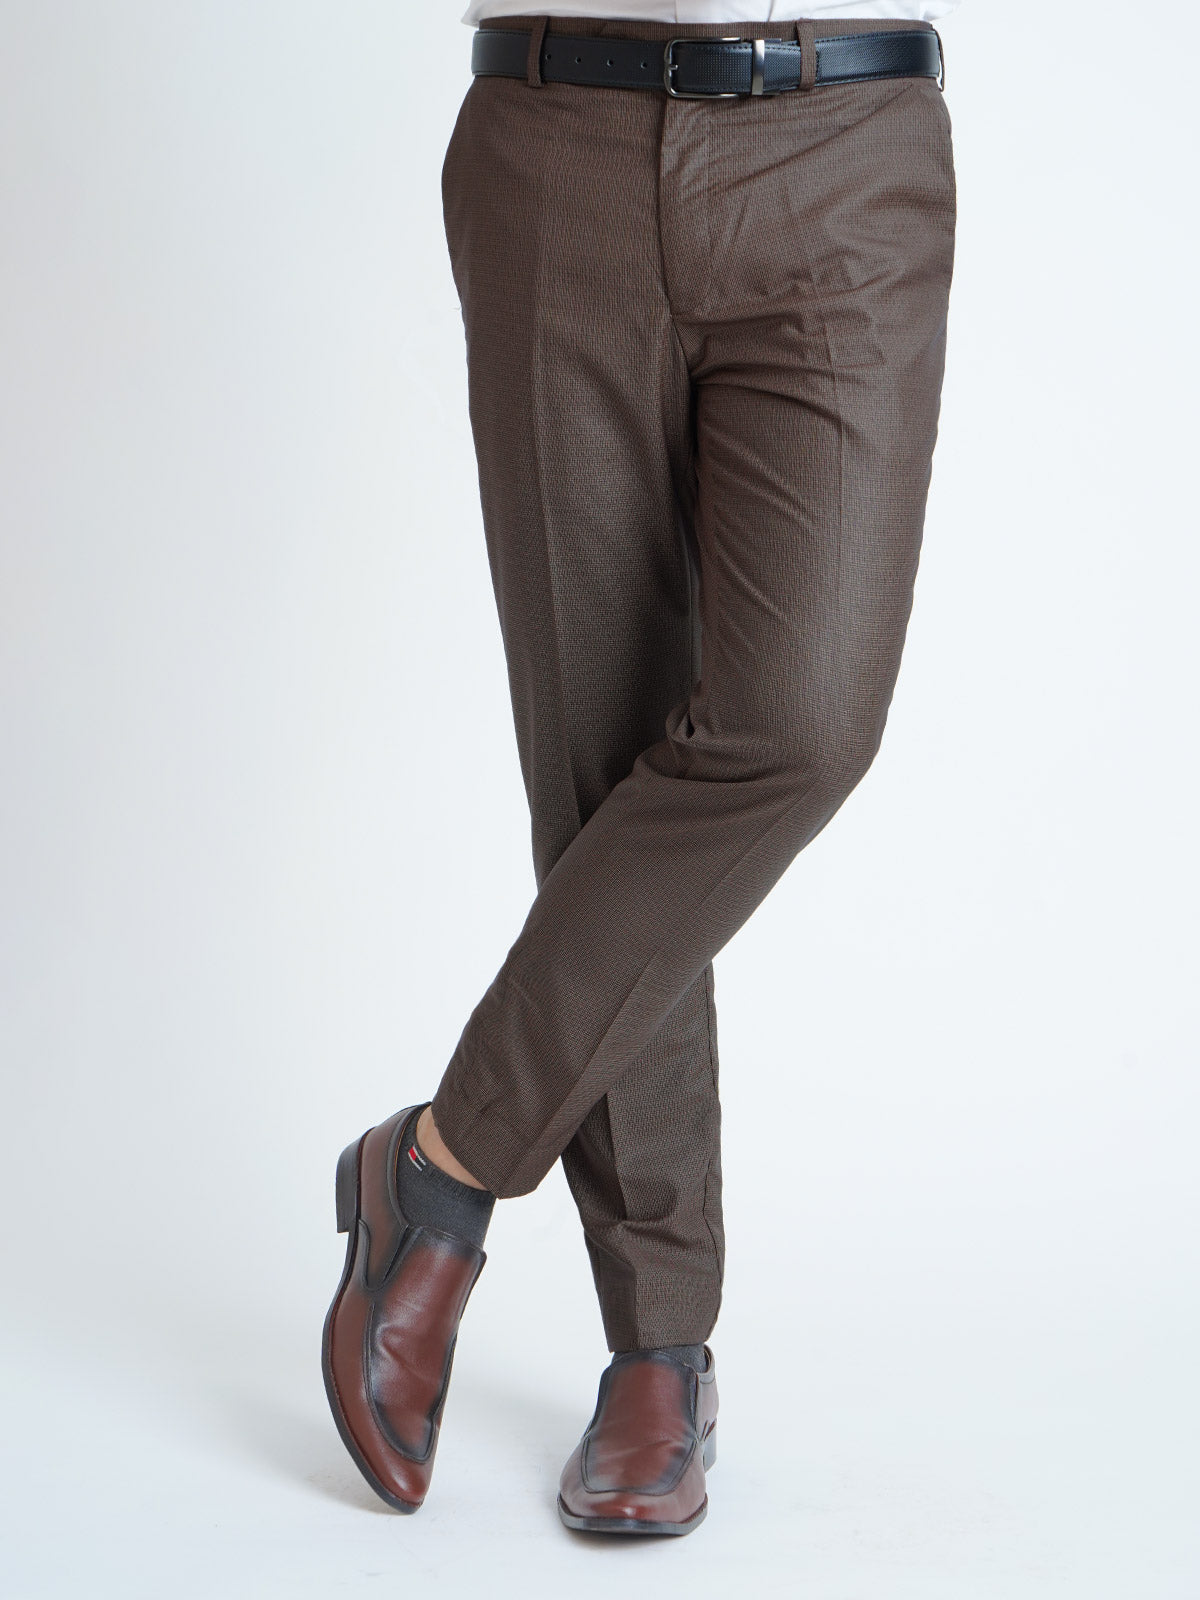 Mid Brown Self Executive Formal Dress Trouser (FDT-115)